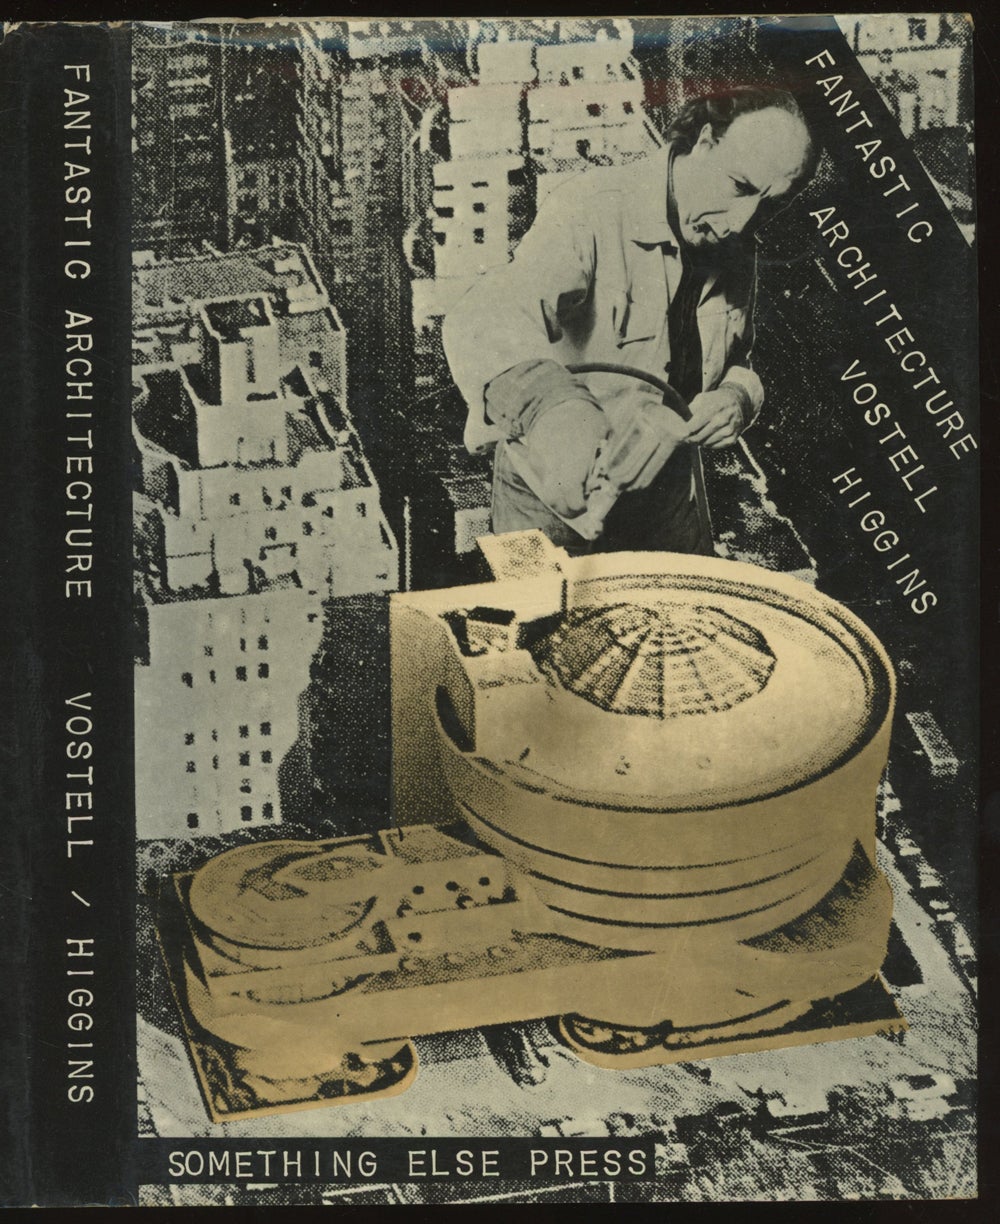 Fantastic Architecture | Wolf Vostell, Dick Higgins, Schwitters ...